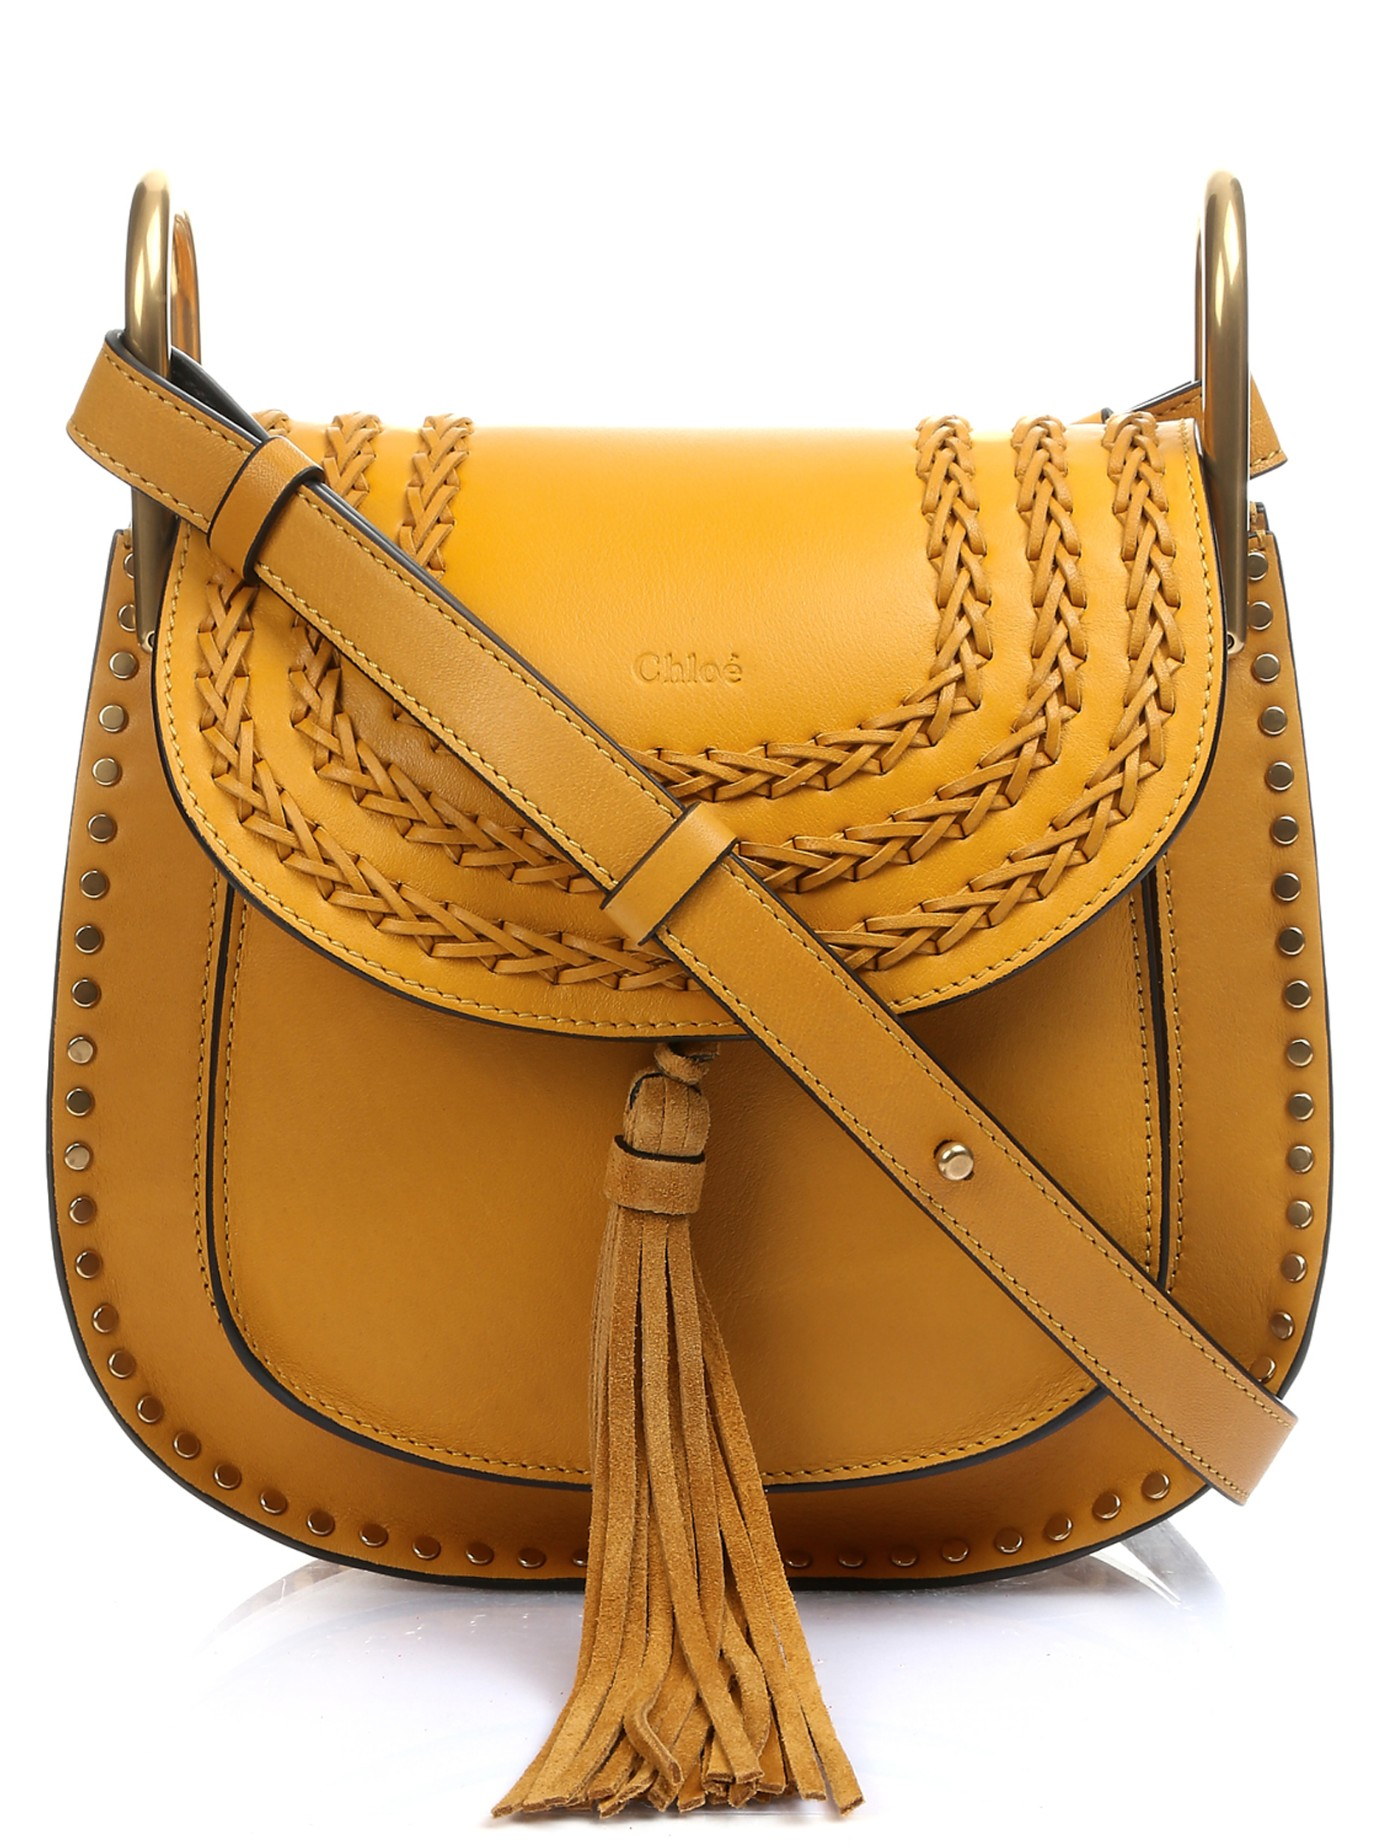 Lyst - Chloé Hudson Small Leather Cross-Body Bag in Yellow